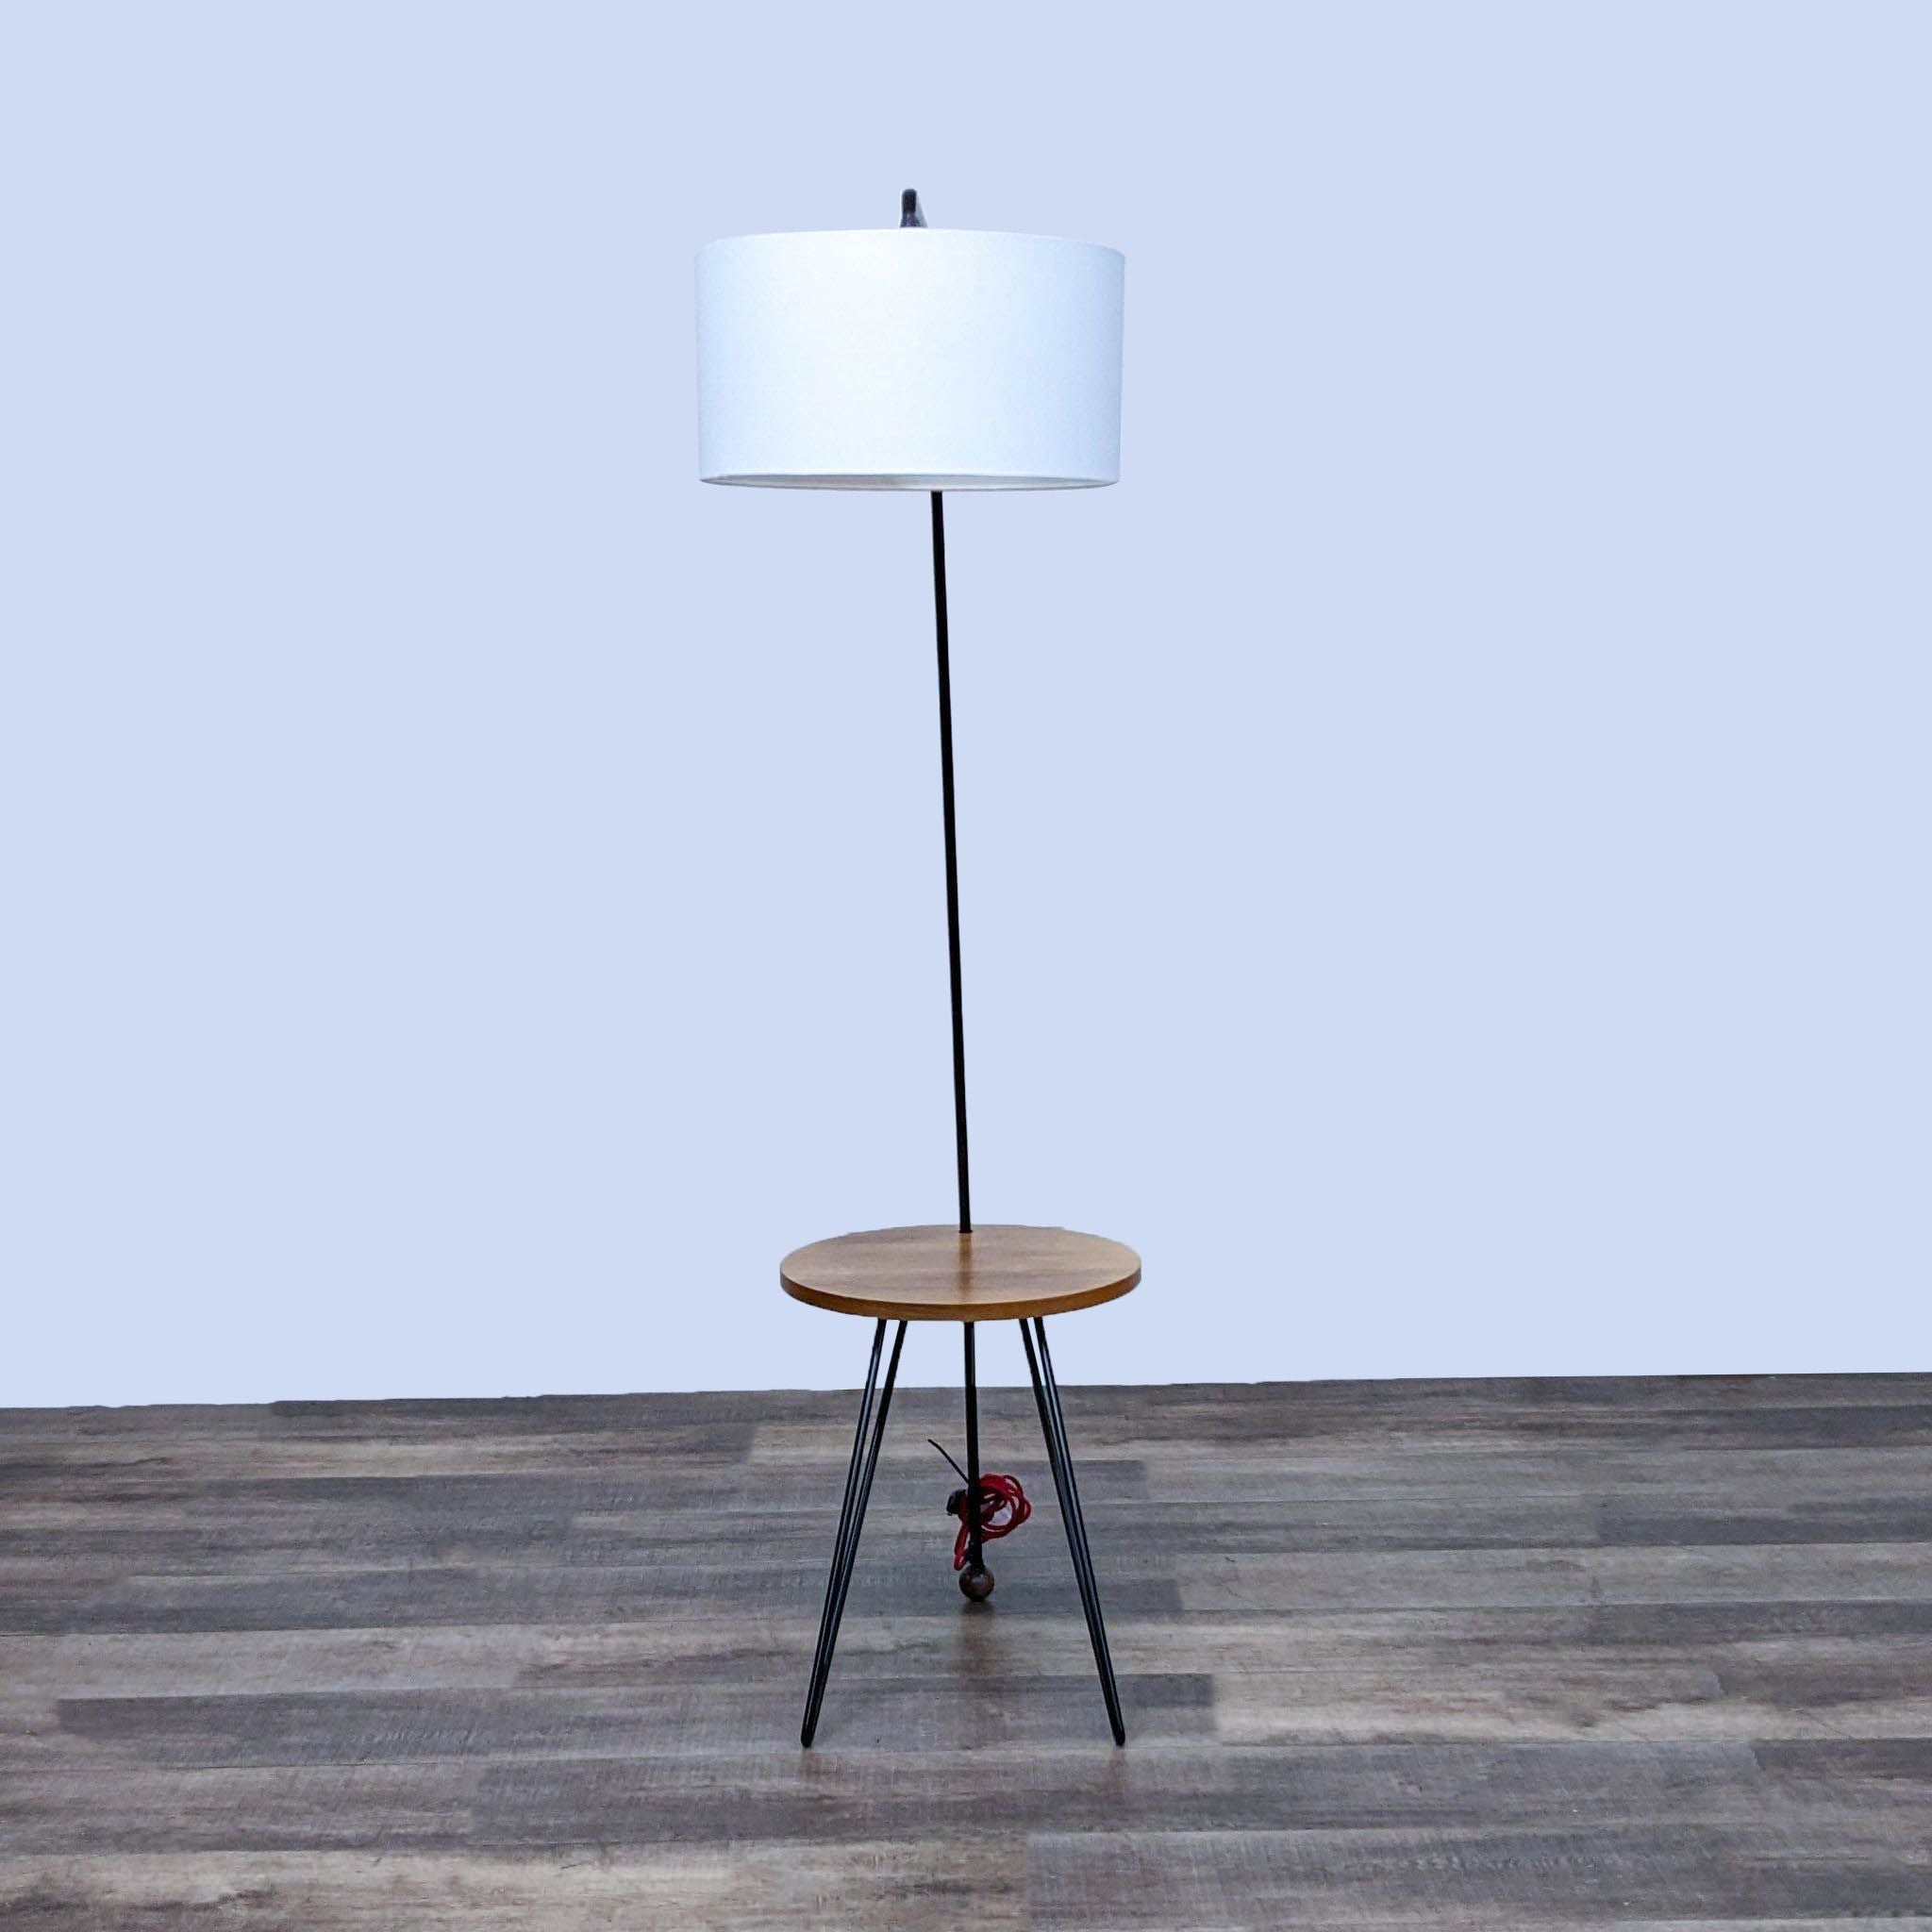 Minimalistic Reperch floor lamp featuring a white drum shade, sleek black stand, wooden shelf, and red-wheeled base.